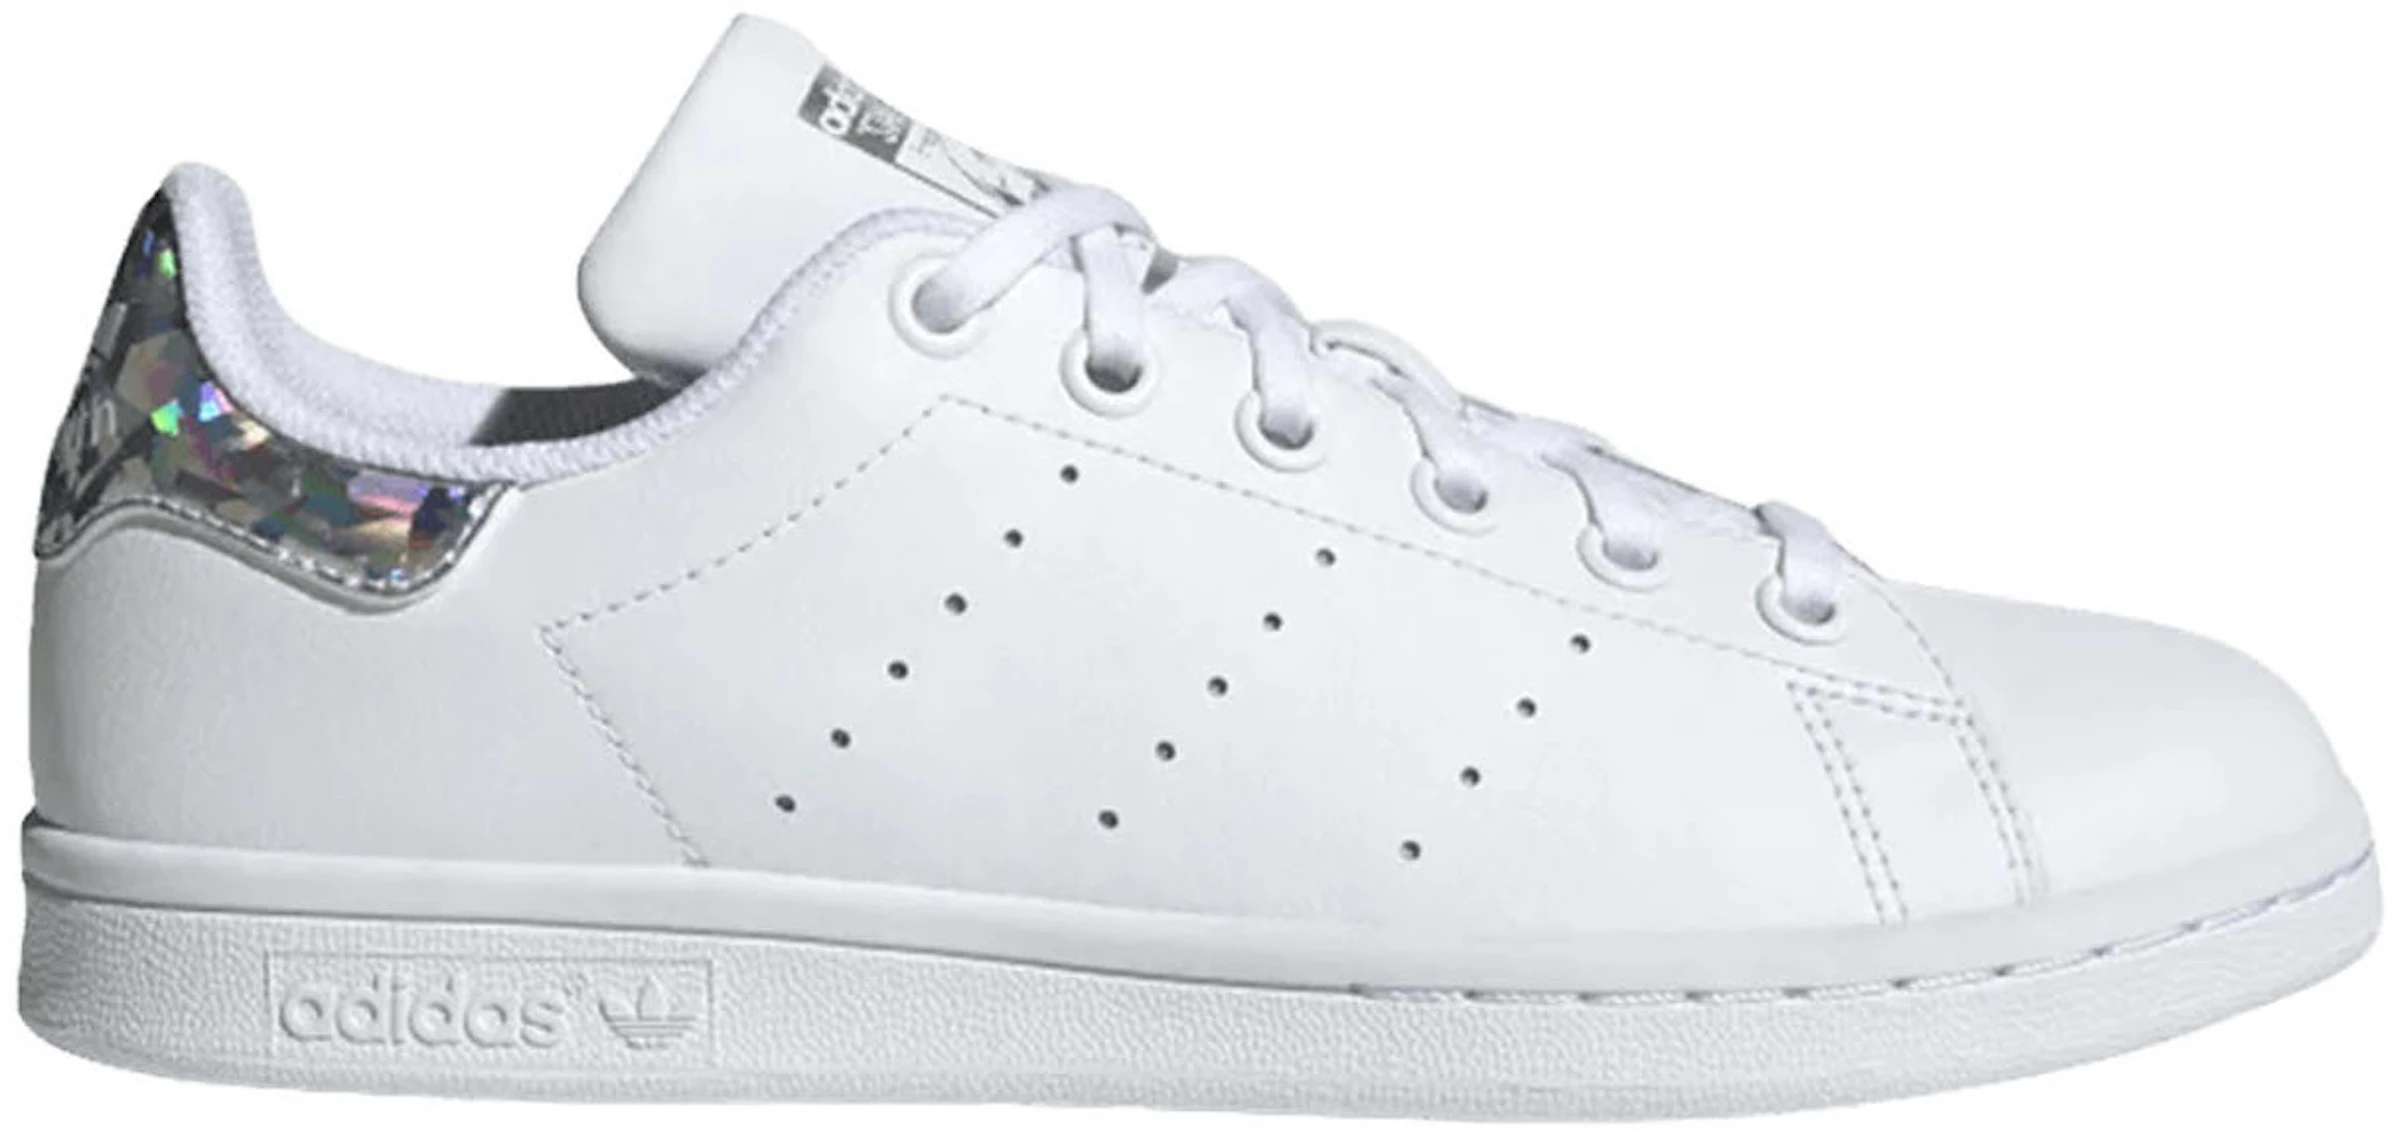 Chemie niveau Europa adidas Stan Smith Sparkly Heel White (Youth) - EE8483 - US